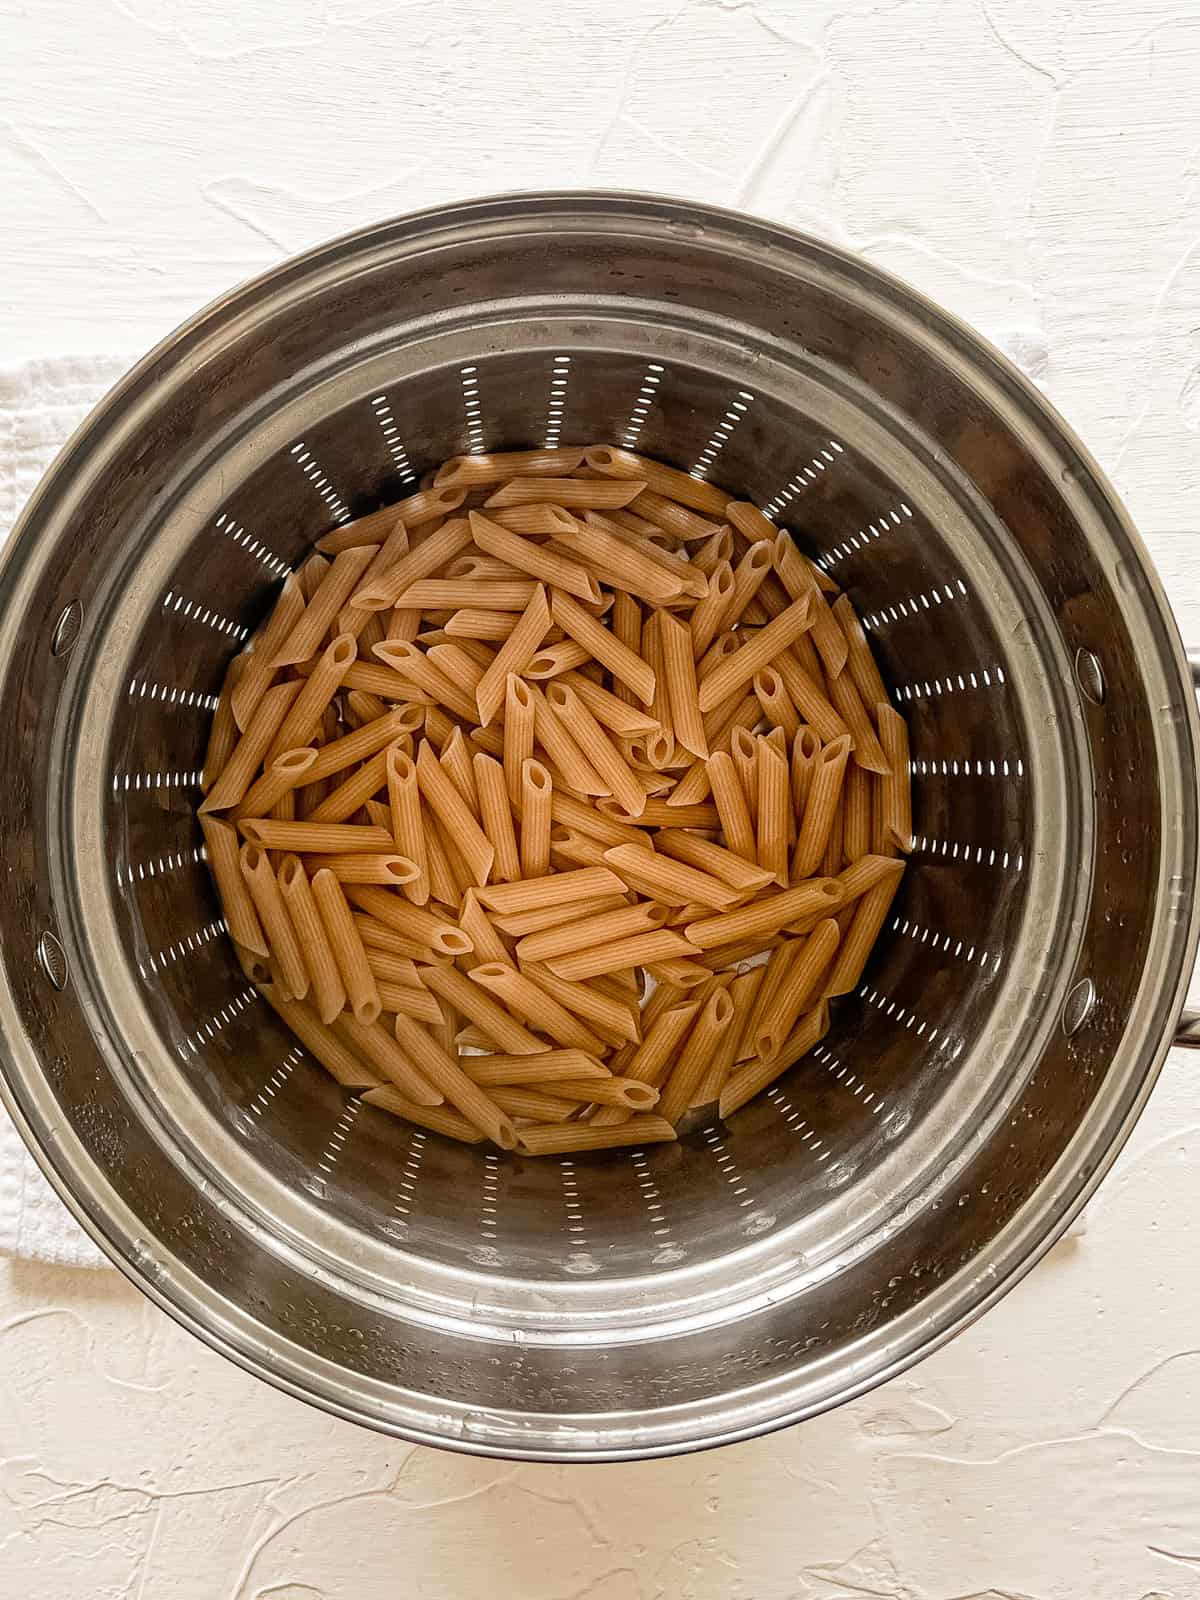 Cooked penne pasta in a stainless steel colander for Chicken Penne with Asparagus and Peppers.